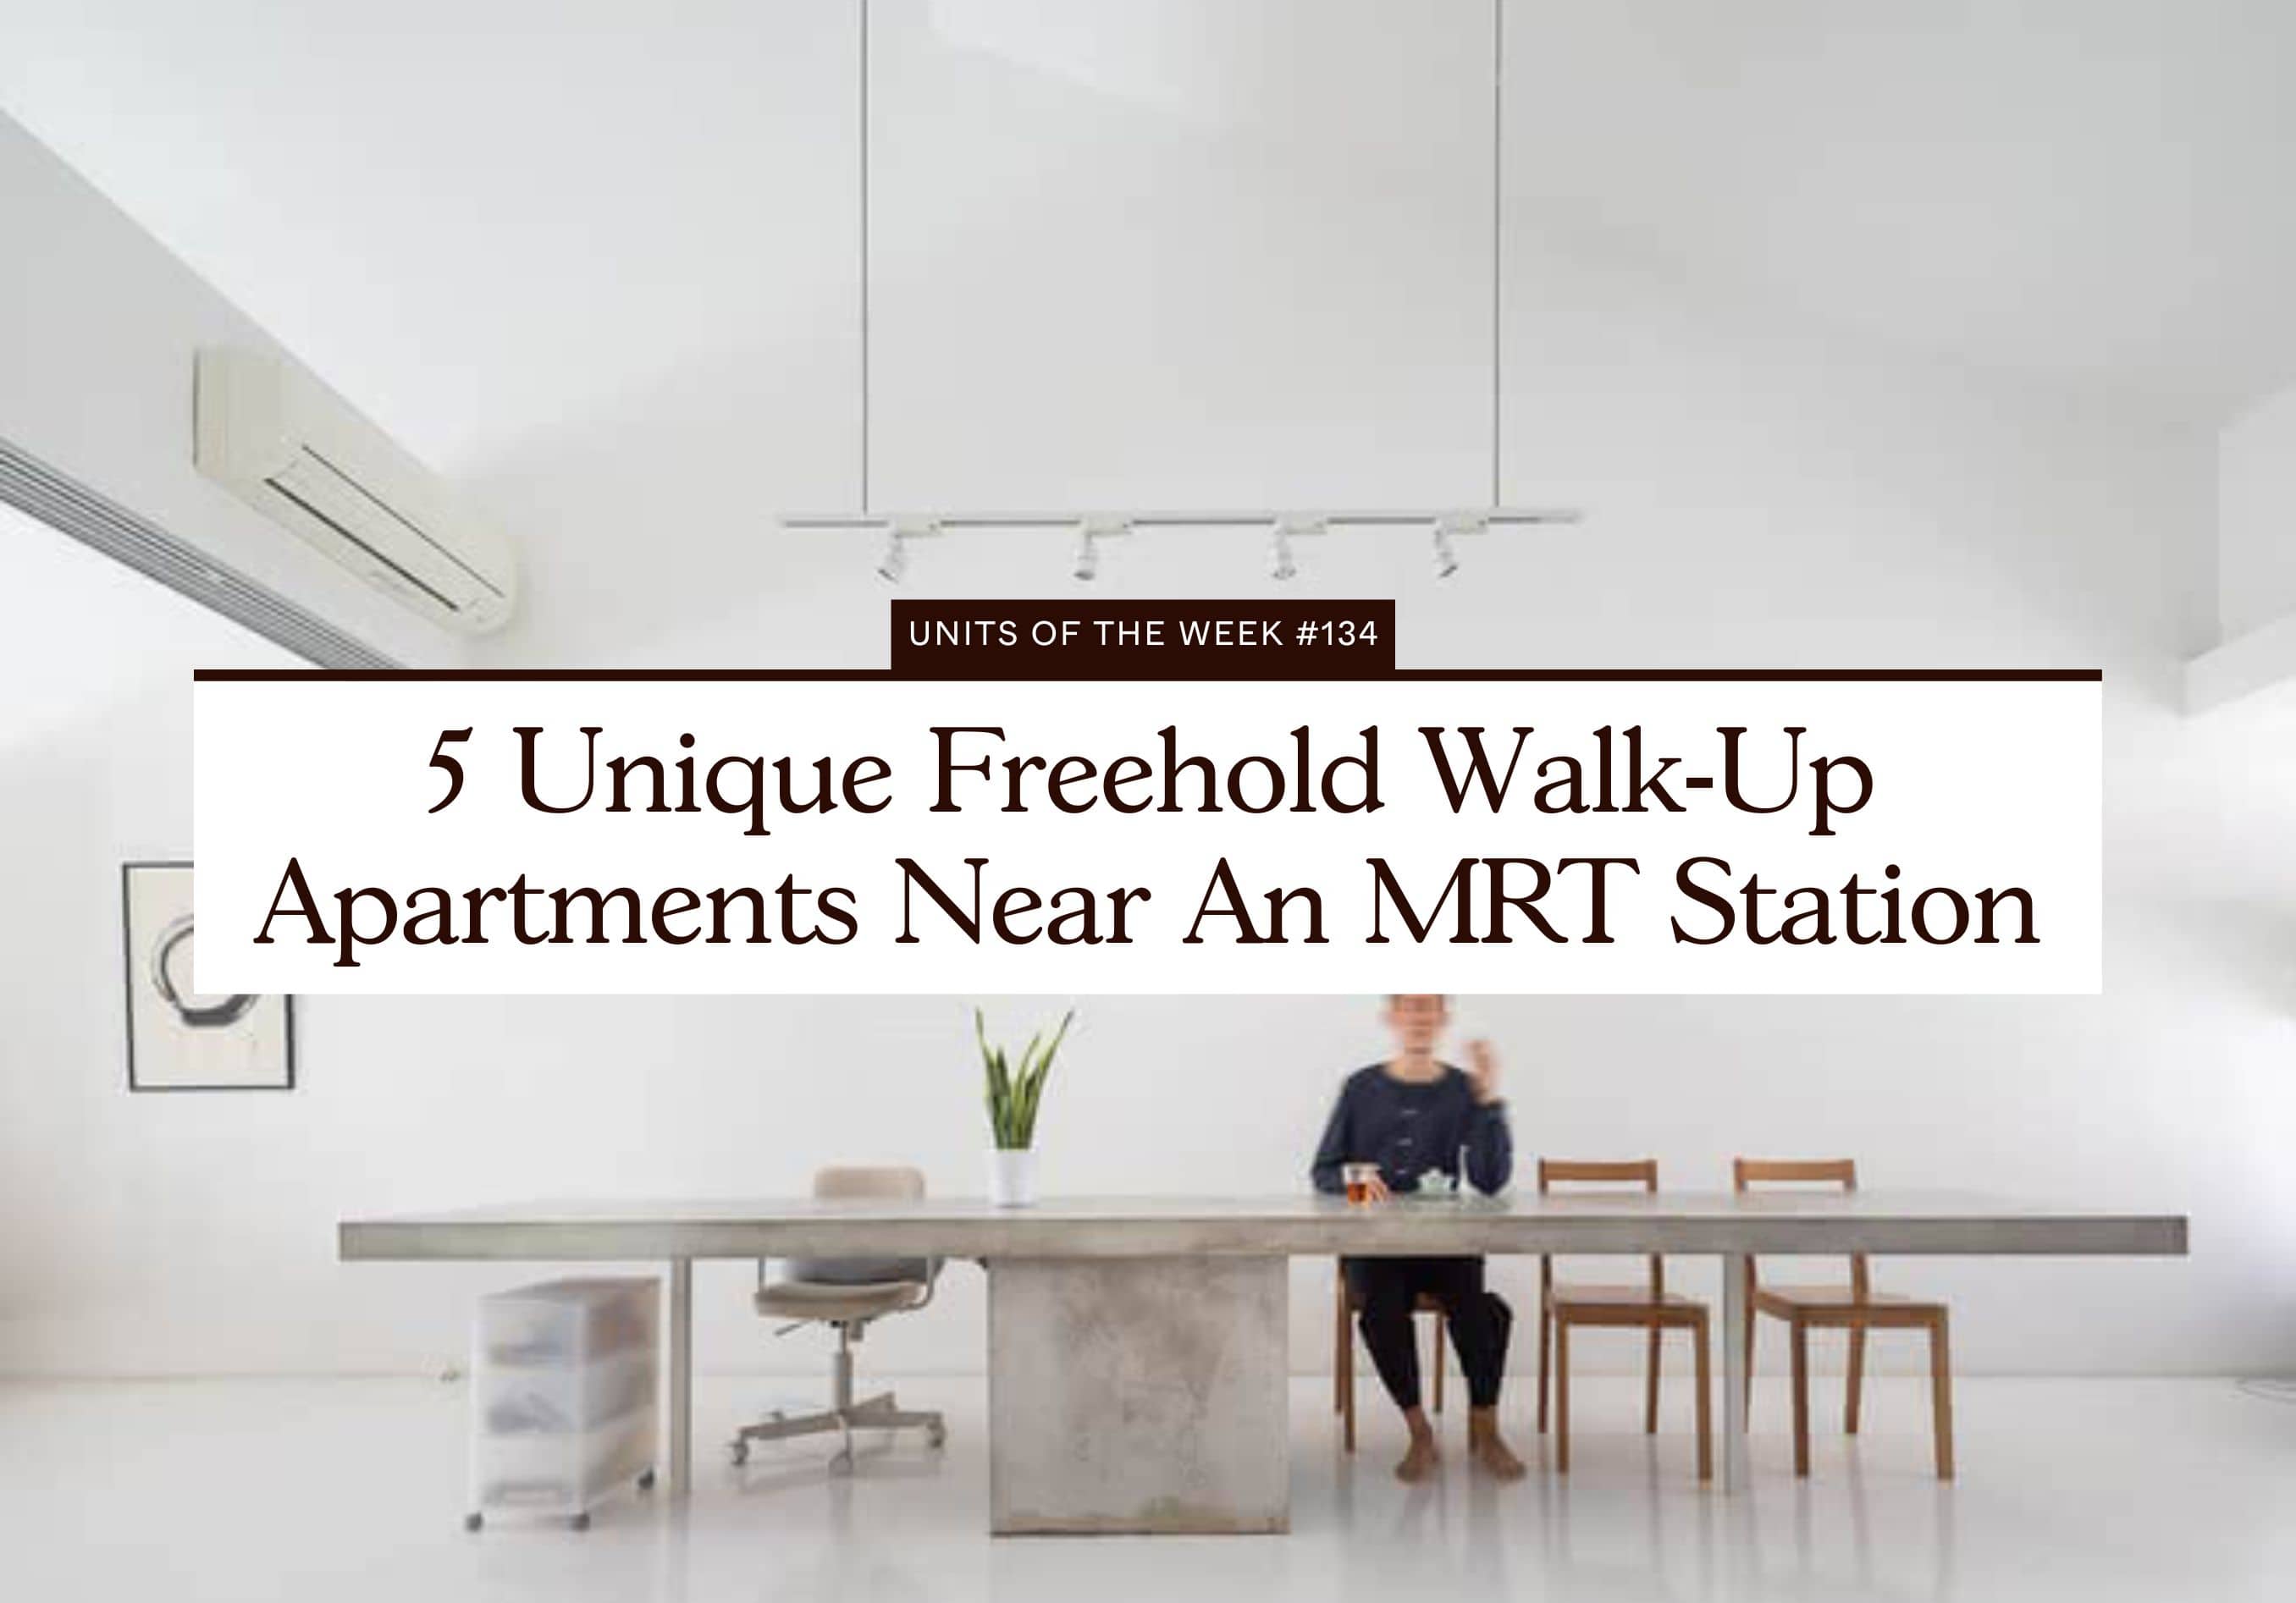 5 Unique Freehold Walk-Up Apartments Near An MRT Station